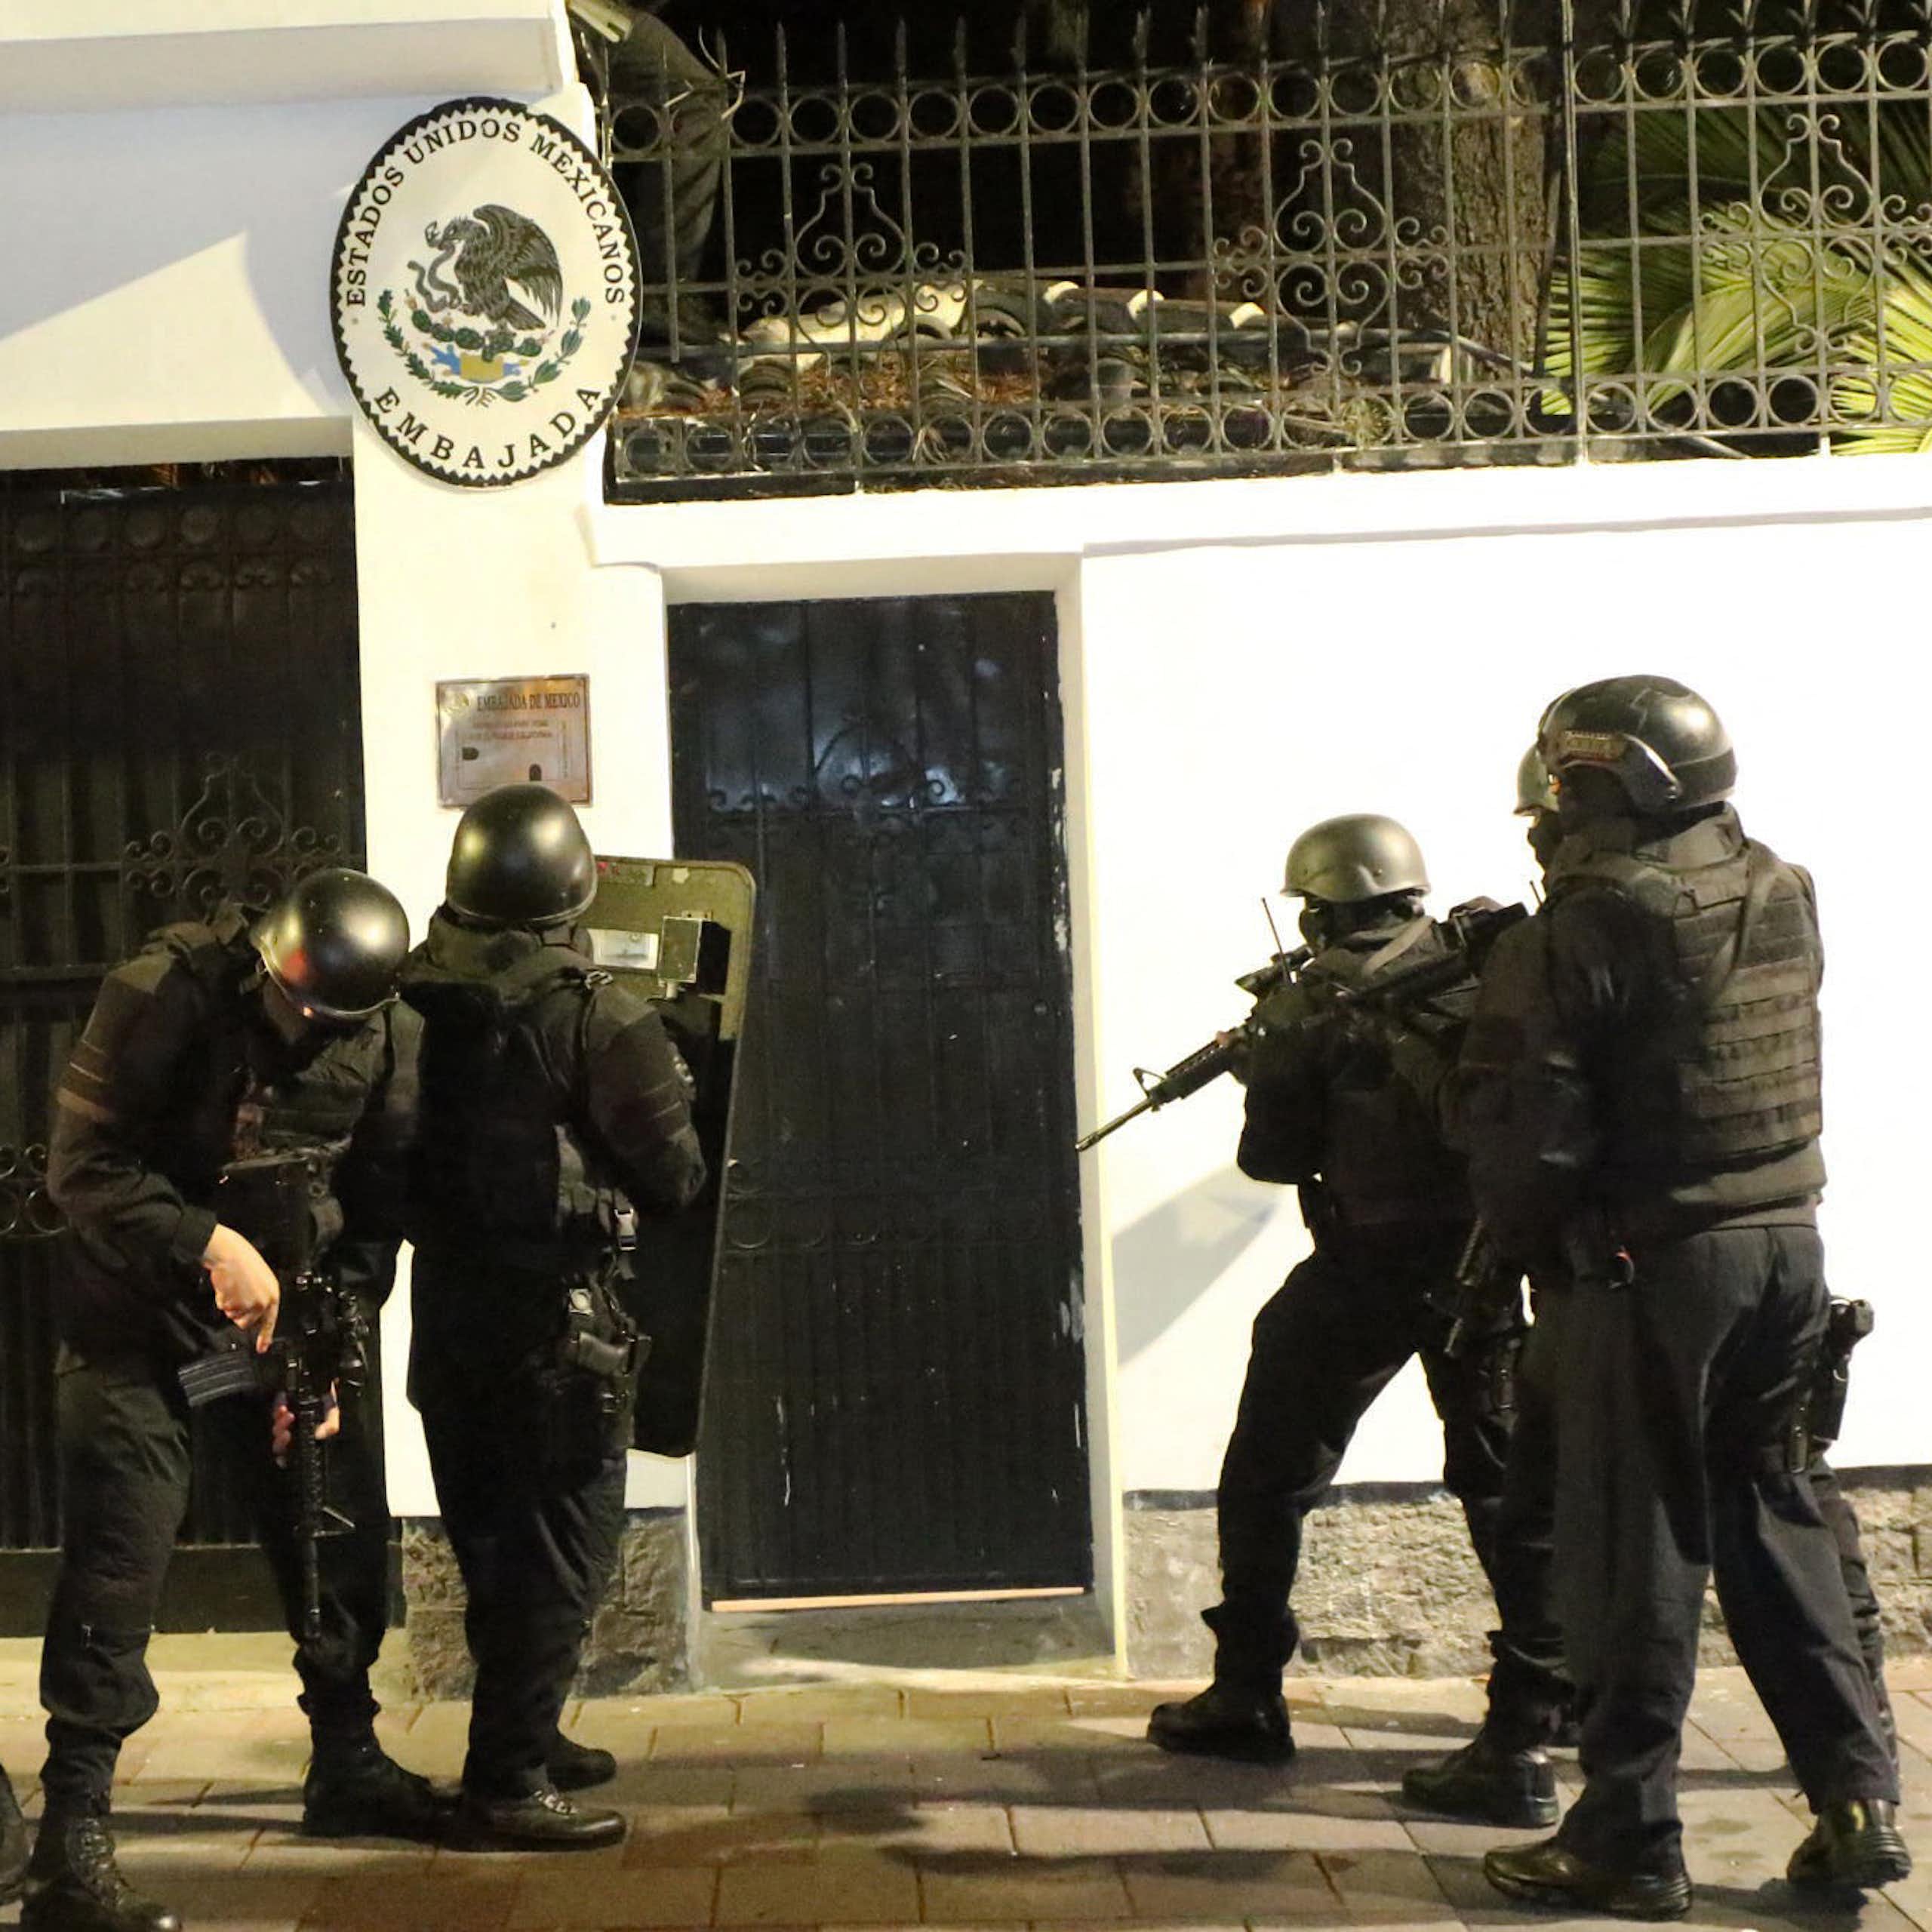 people in helmets and riot gear carrying guns stand outside a white building.